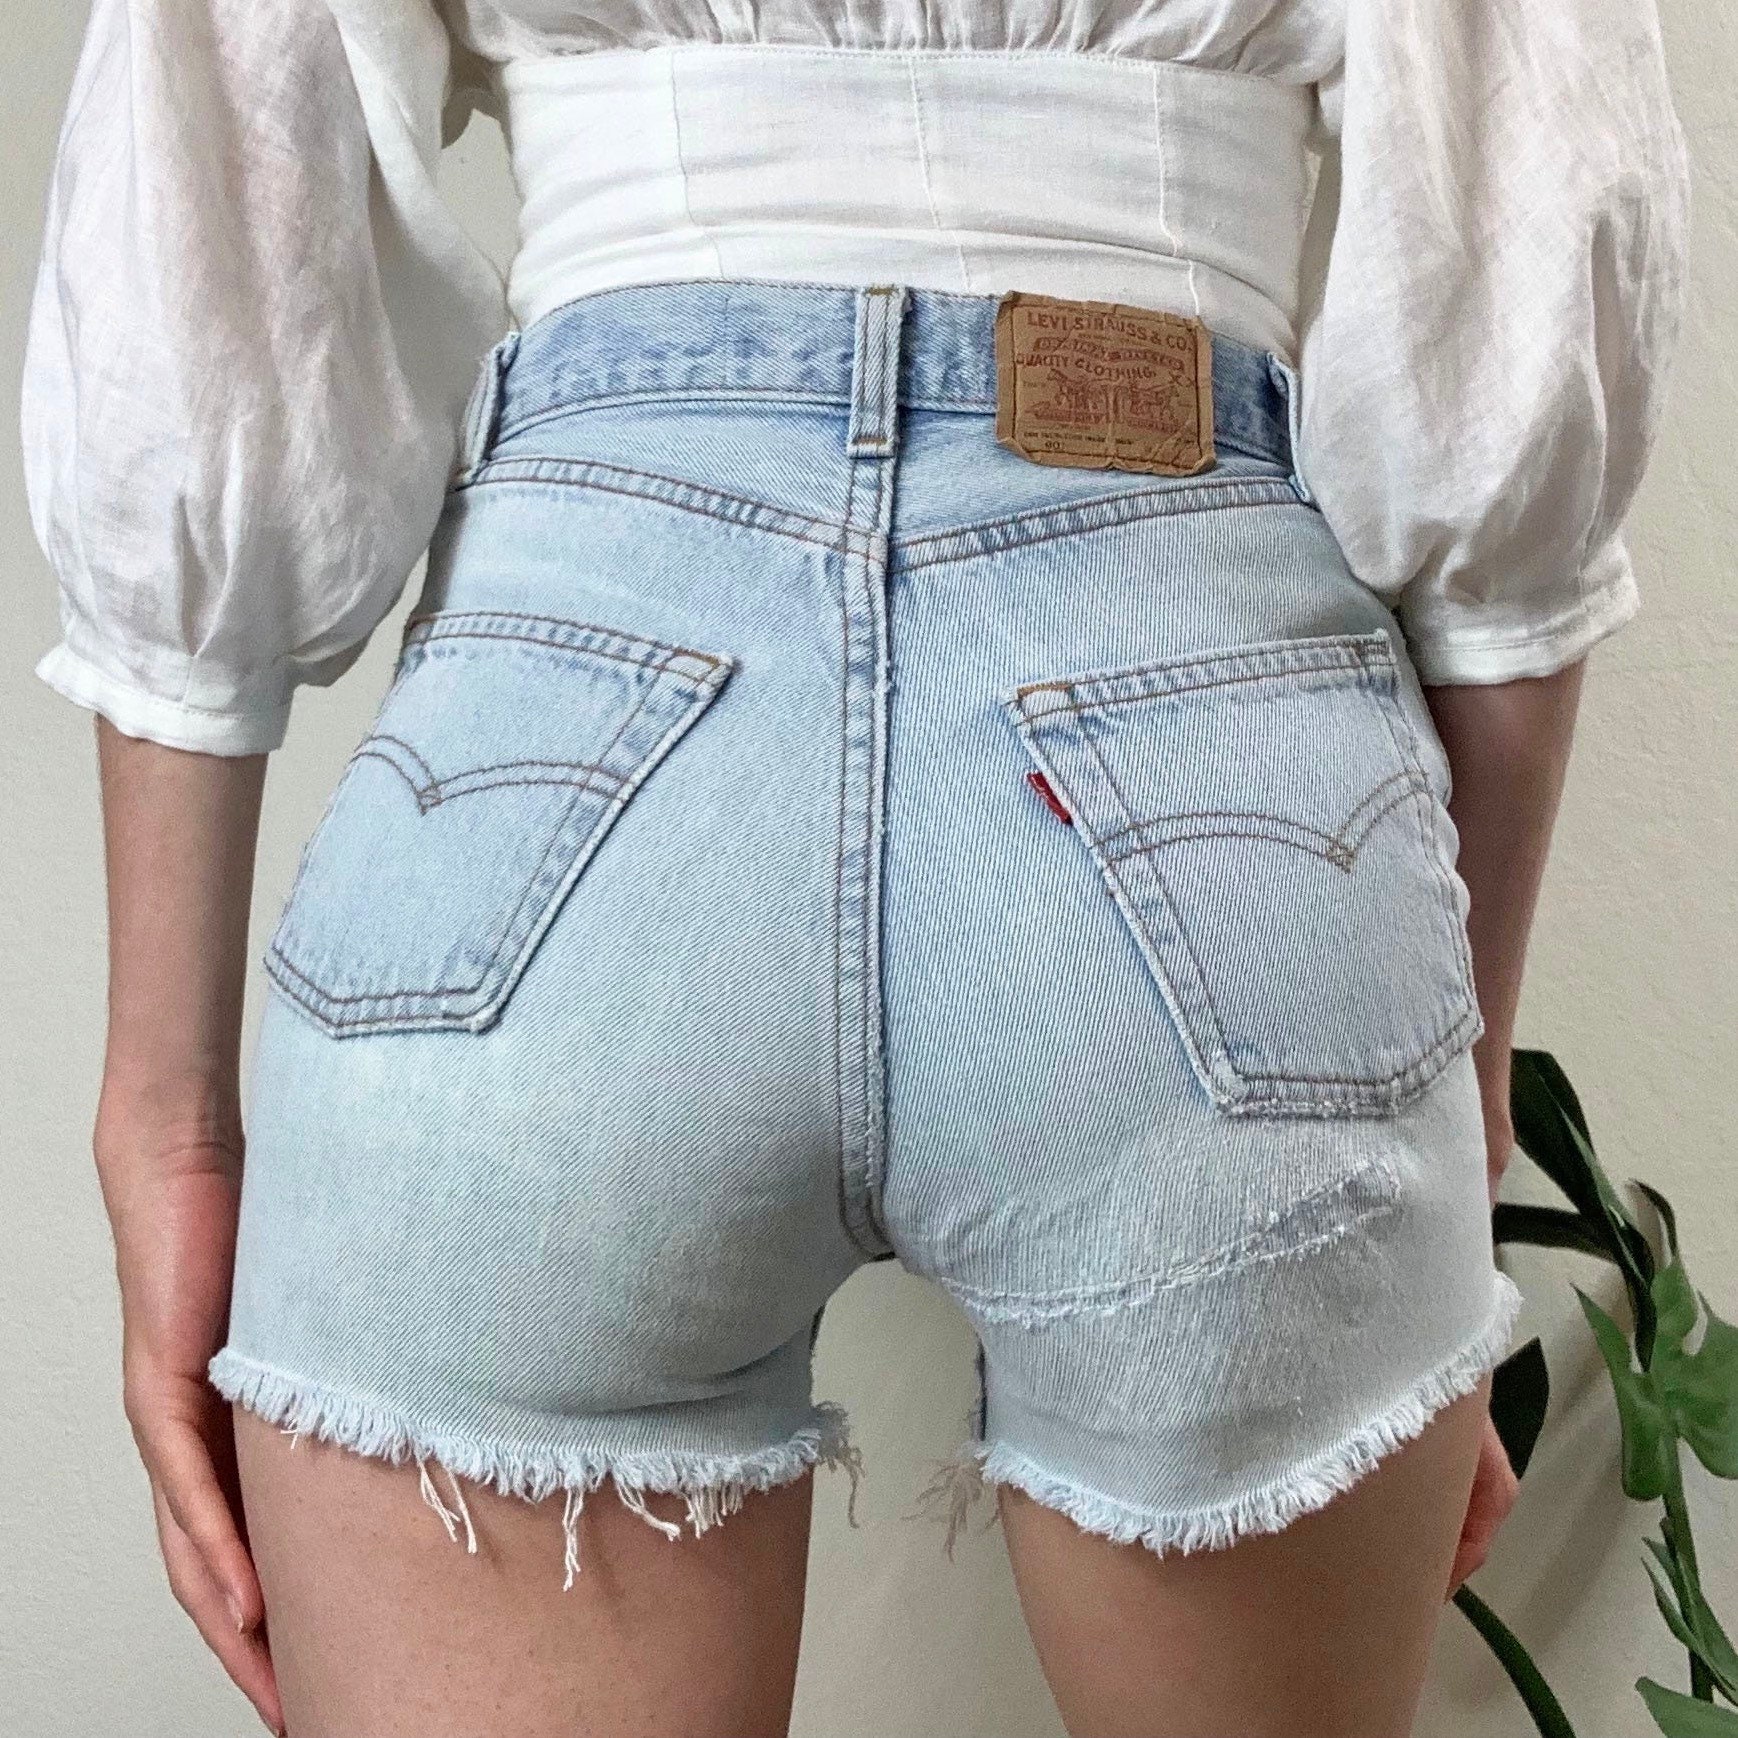 XS/24 Vintage 901 Light Wash High Waisted Distressed Levis | Etsy